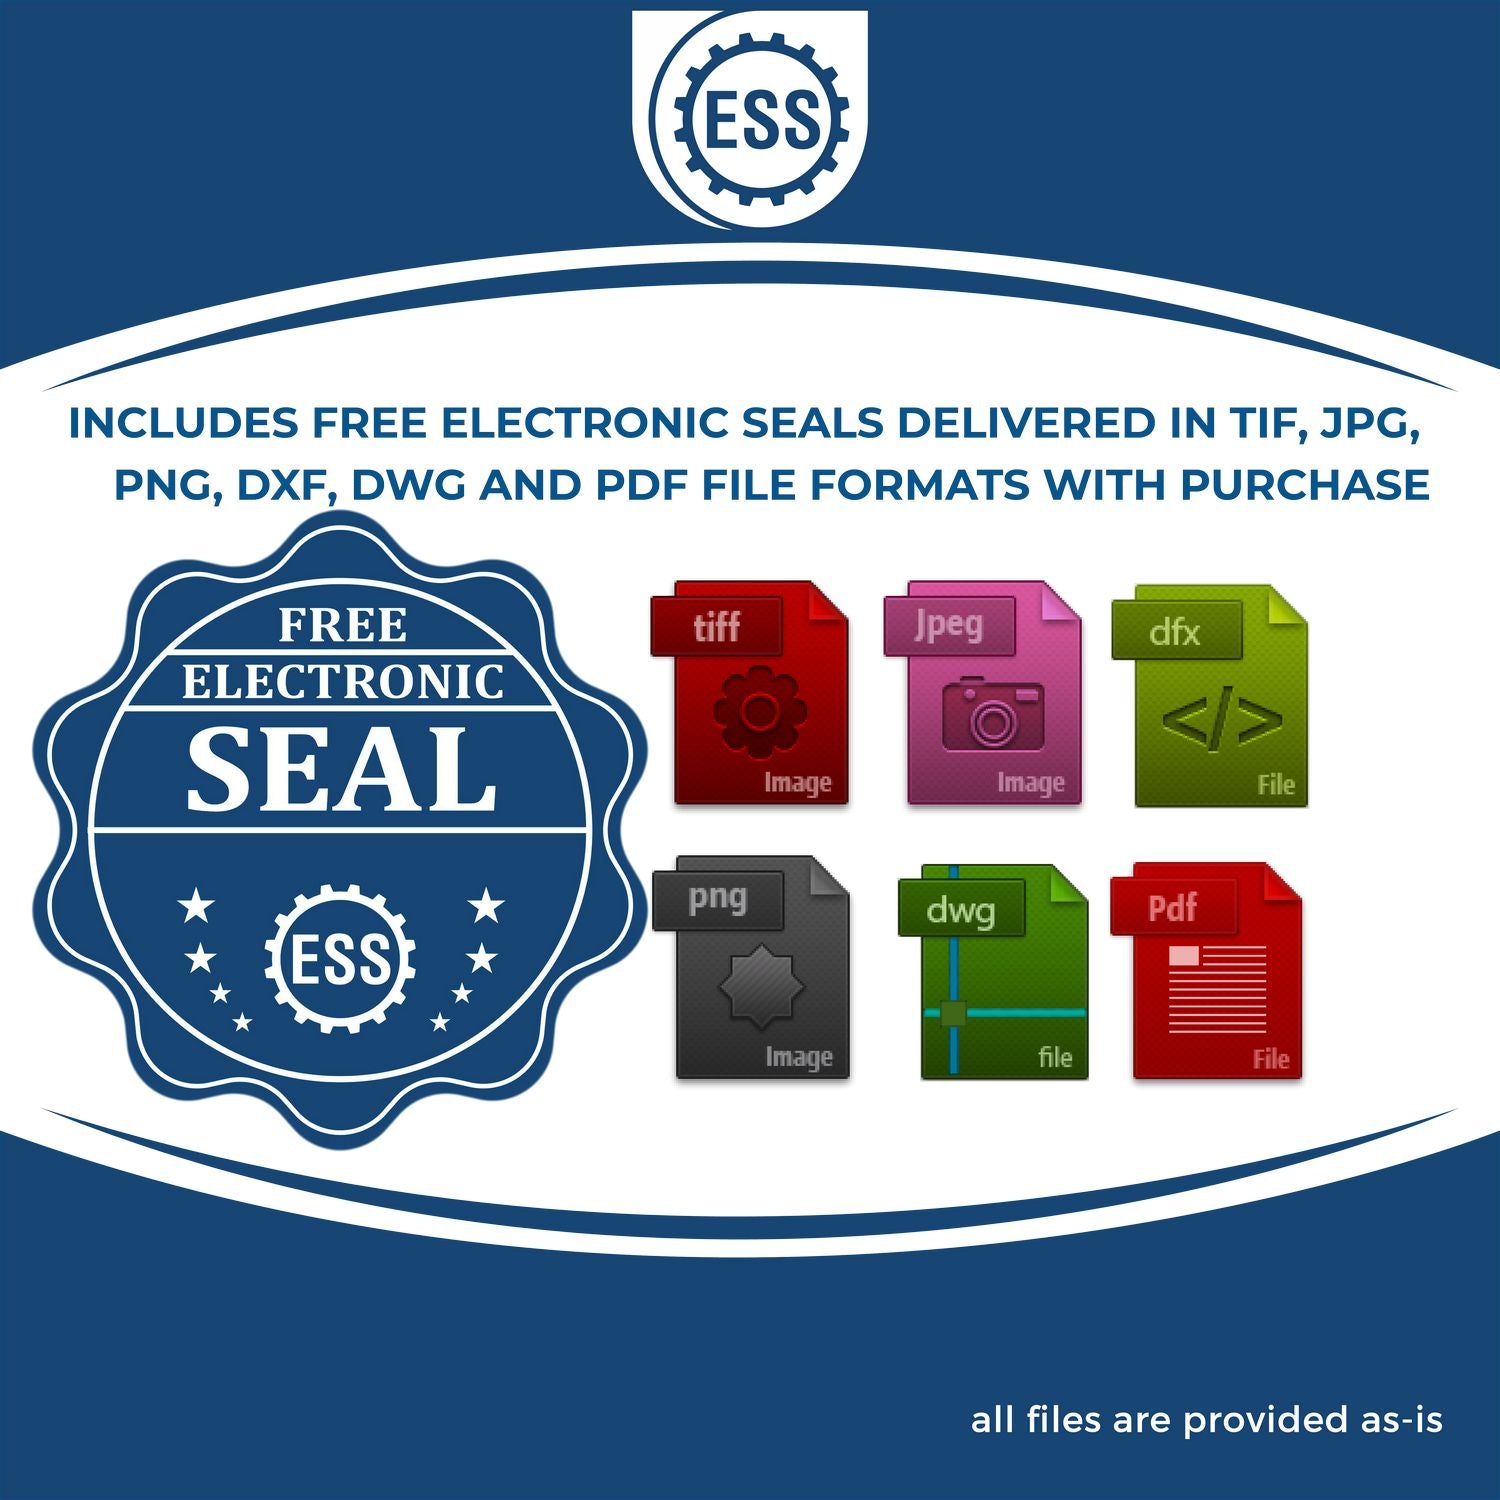 An infographic for the free electronic seal for the Heavy Duty Cast Iron Oklahoma Land Surveyor Seal Embosser illustrating the different file type icons such as DXF, DWG, TIF, JPG and PNG.